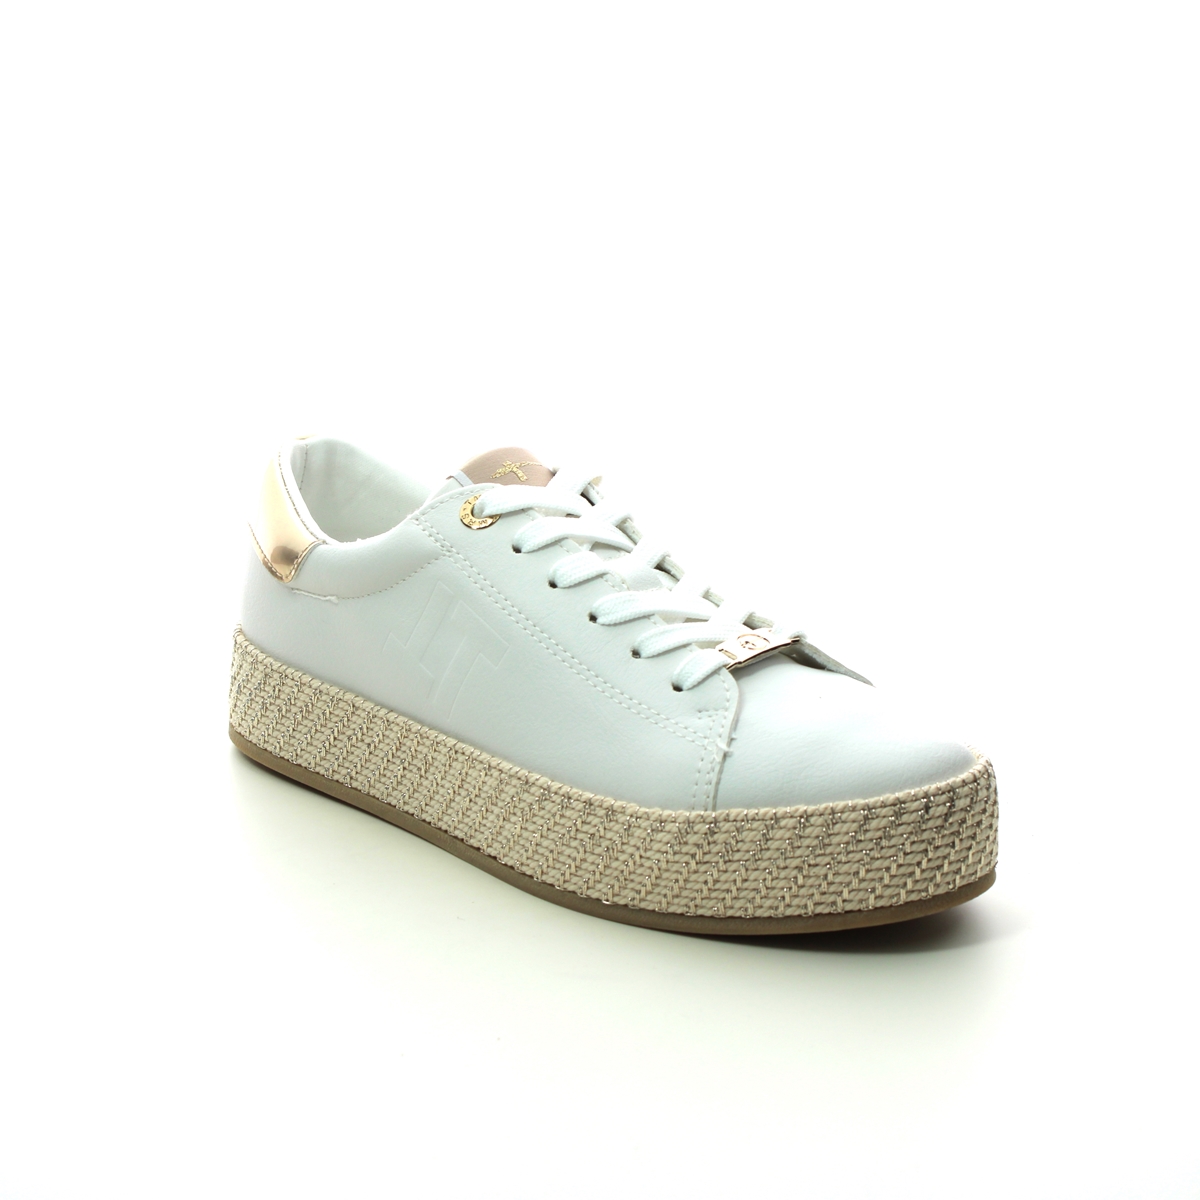 Tamaris Espadrille White Gold Womens trainers 23713-20-190 in a Plain Man-made in Size 37